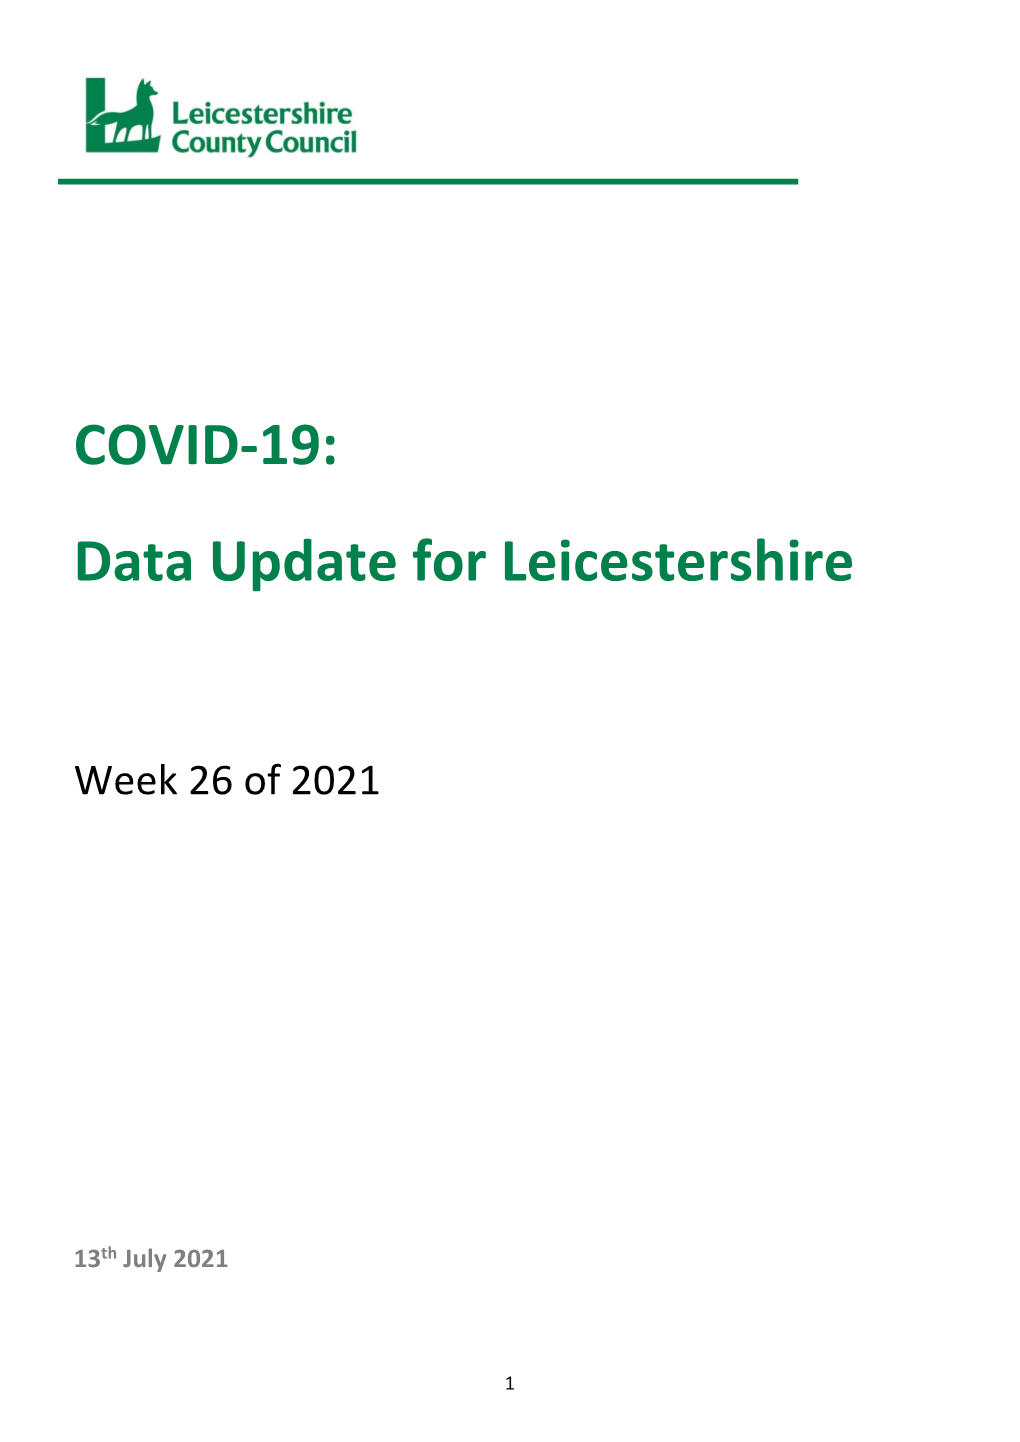 COVID-19: Data Update for Leicestershire (Week 26 of 2021)